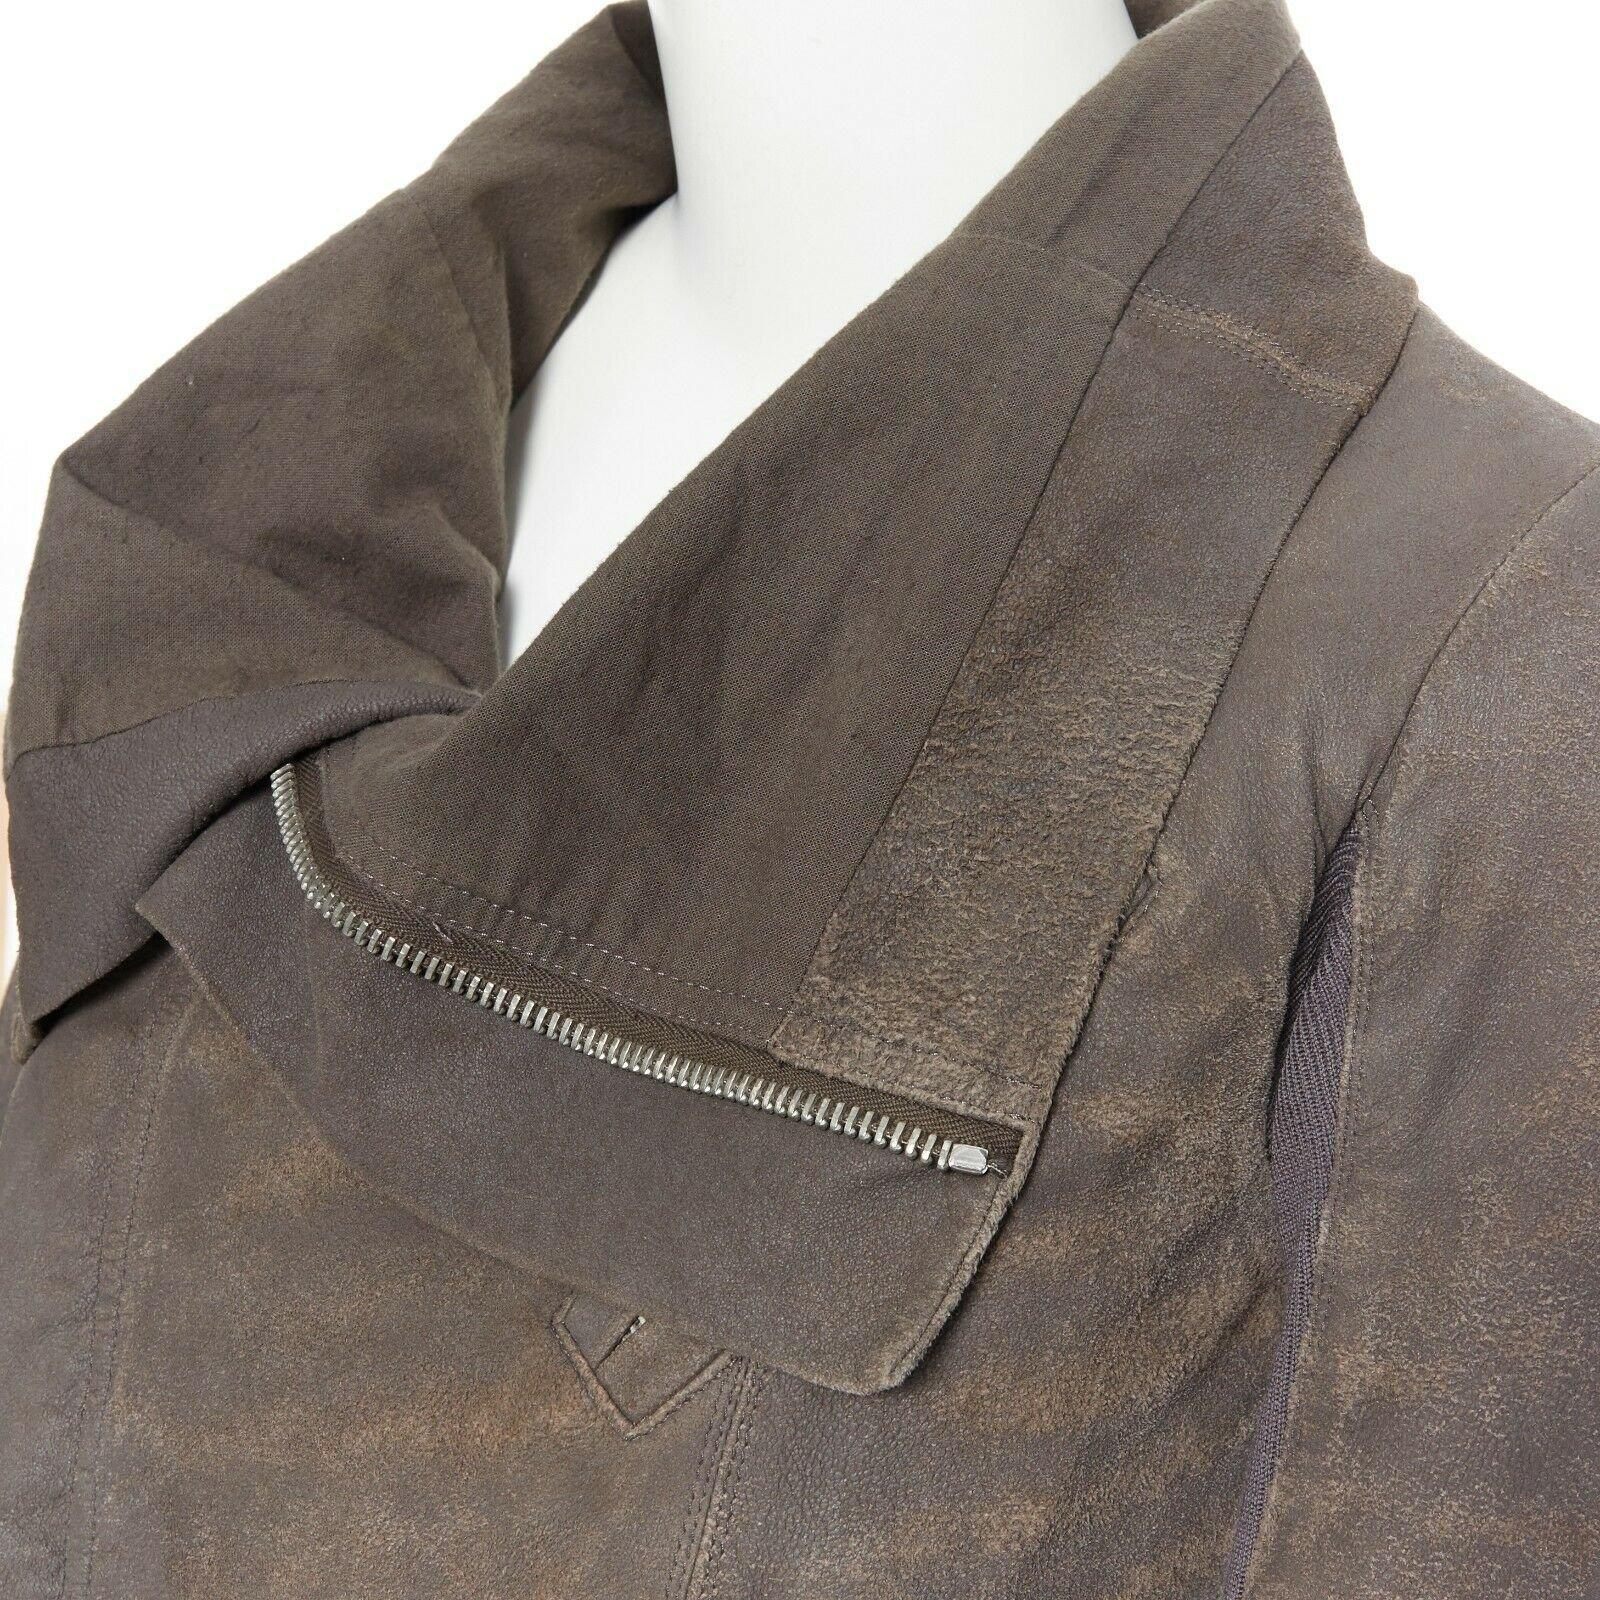 RICK OWENS dark dust grey lambskin drape shawl collar distress biker jacket IT38 Reference: CC/AECG00288 
Brand: Rick Owens 
Designer: Rick Owens 
Material: Leather 
Color: Grey 
Pattern: Solid 
Closure: Zip 
Made in: Italy 

CONDITION: 
Condition: